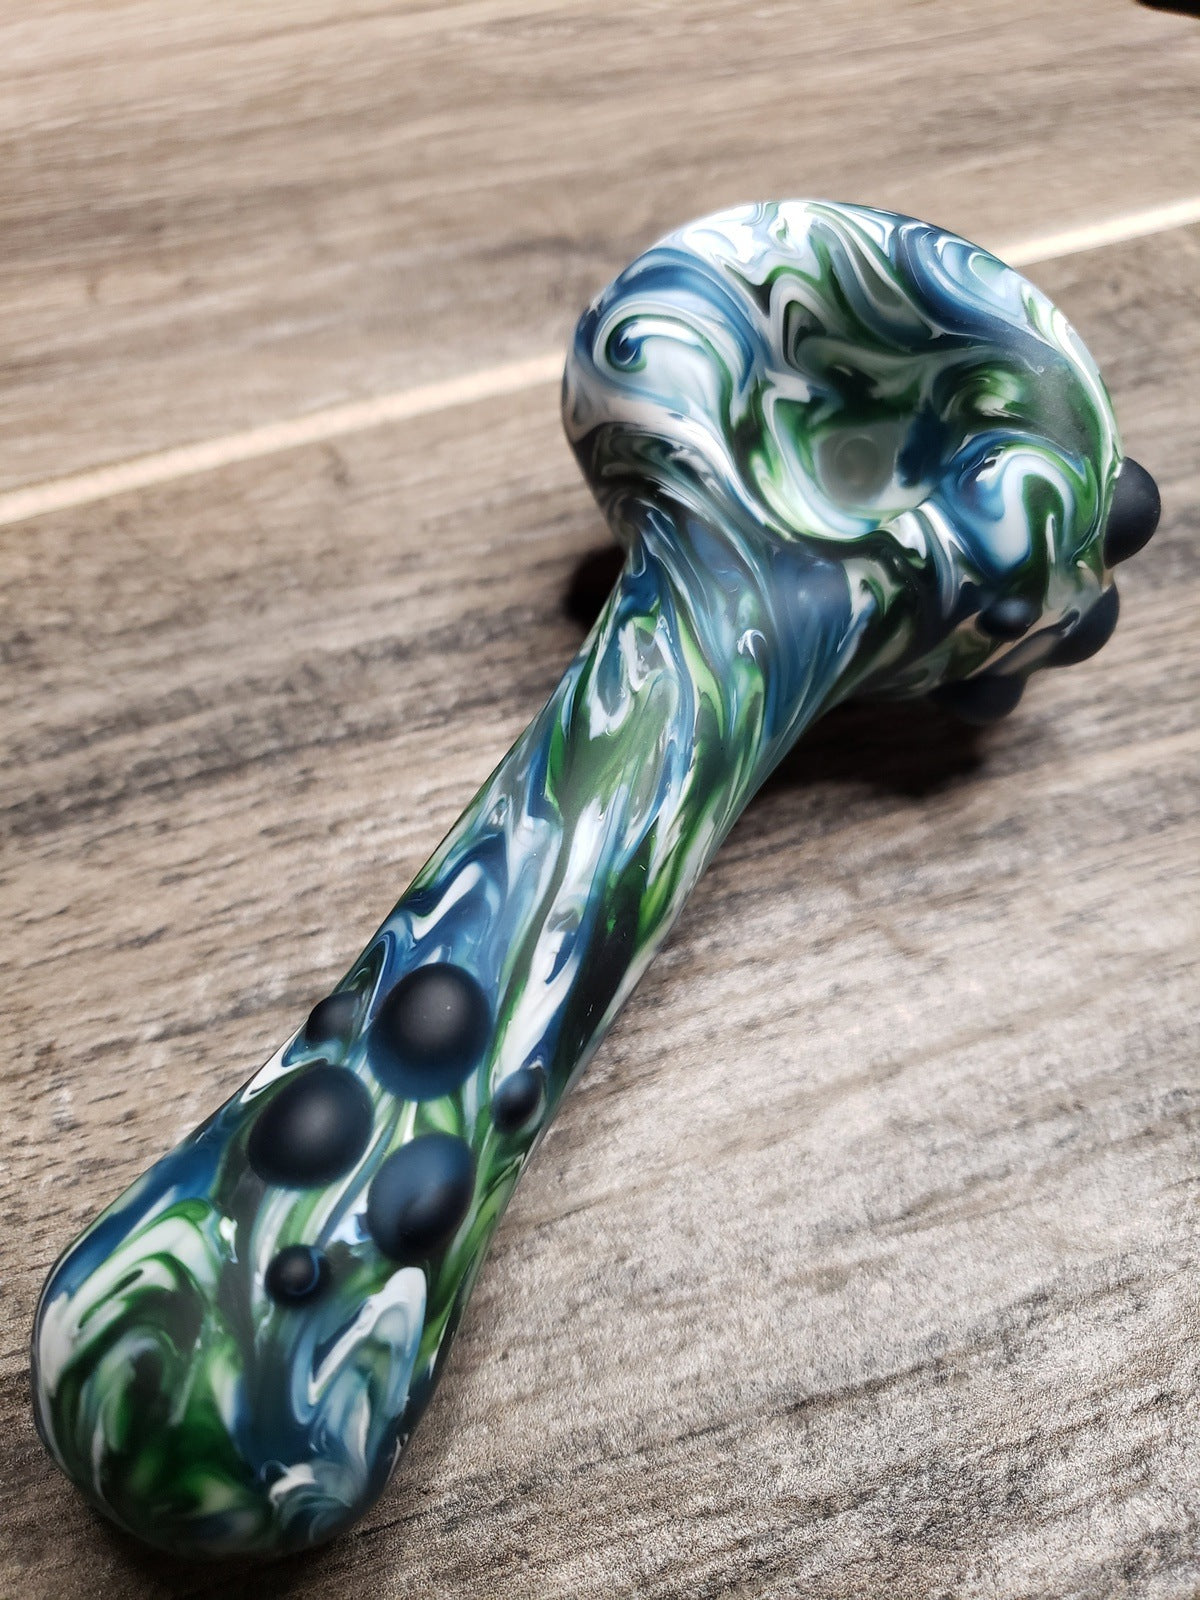 Sanblasted White Spoon With Green & Blue Liquid Swirl